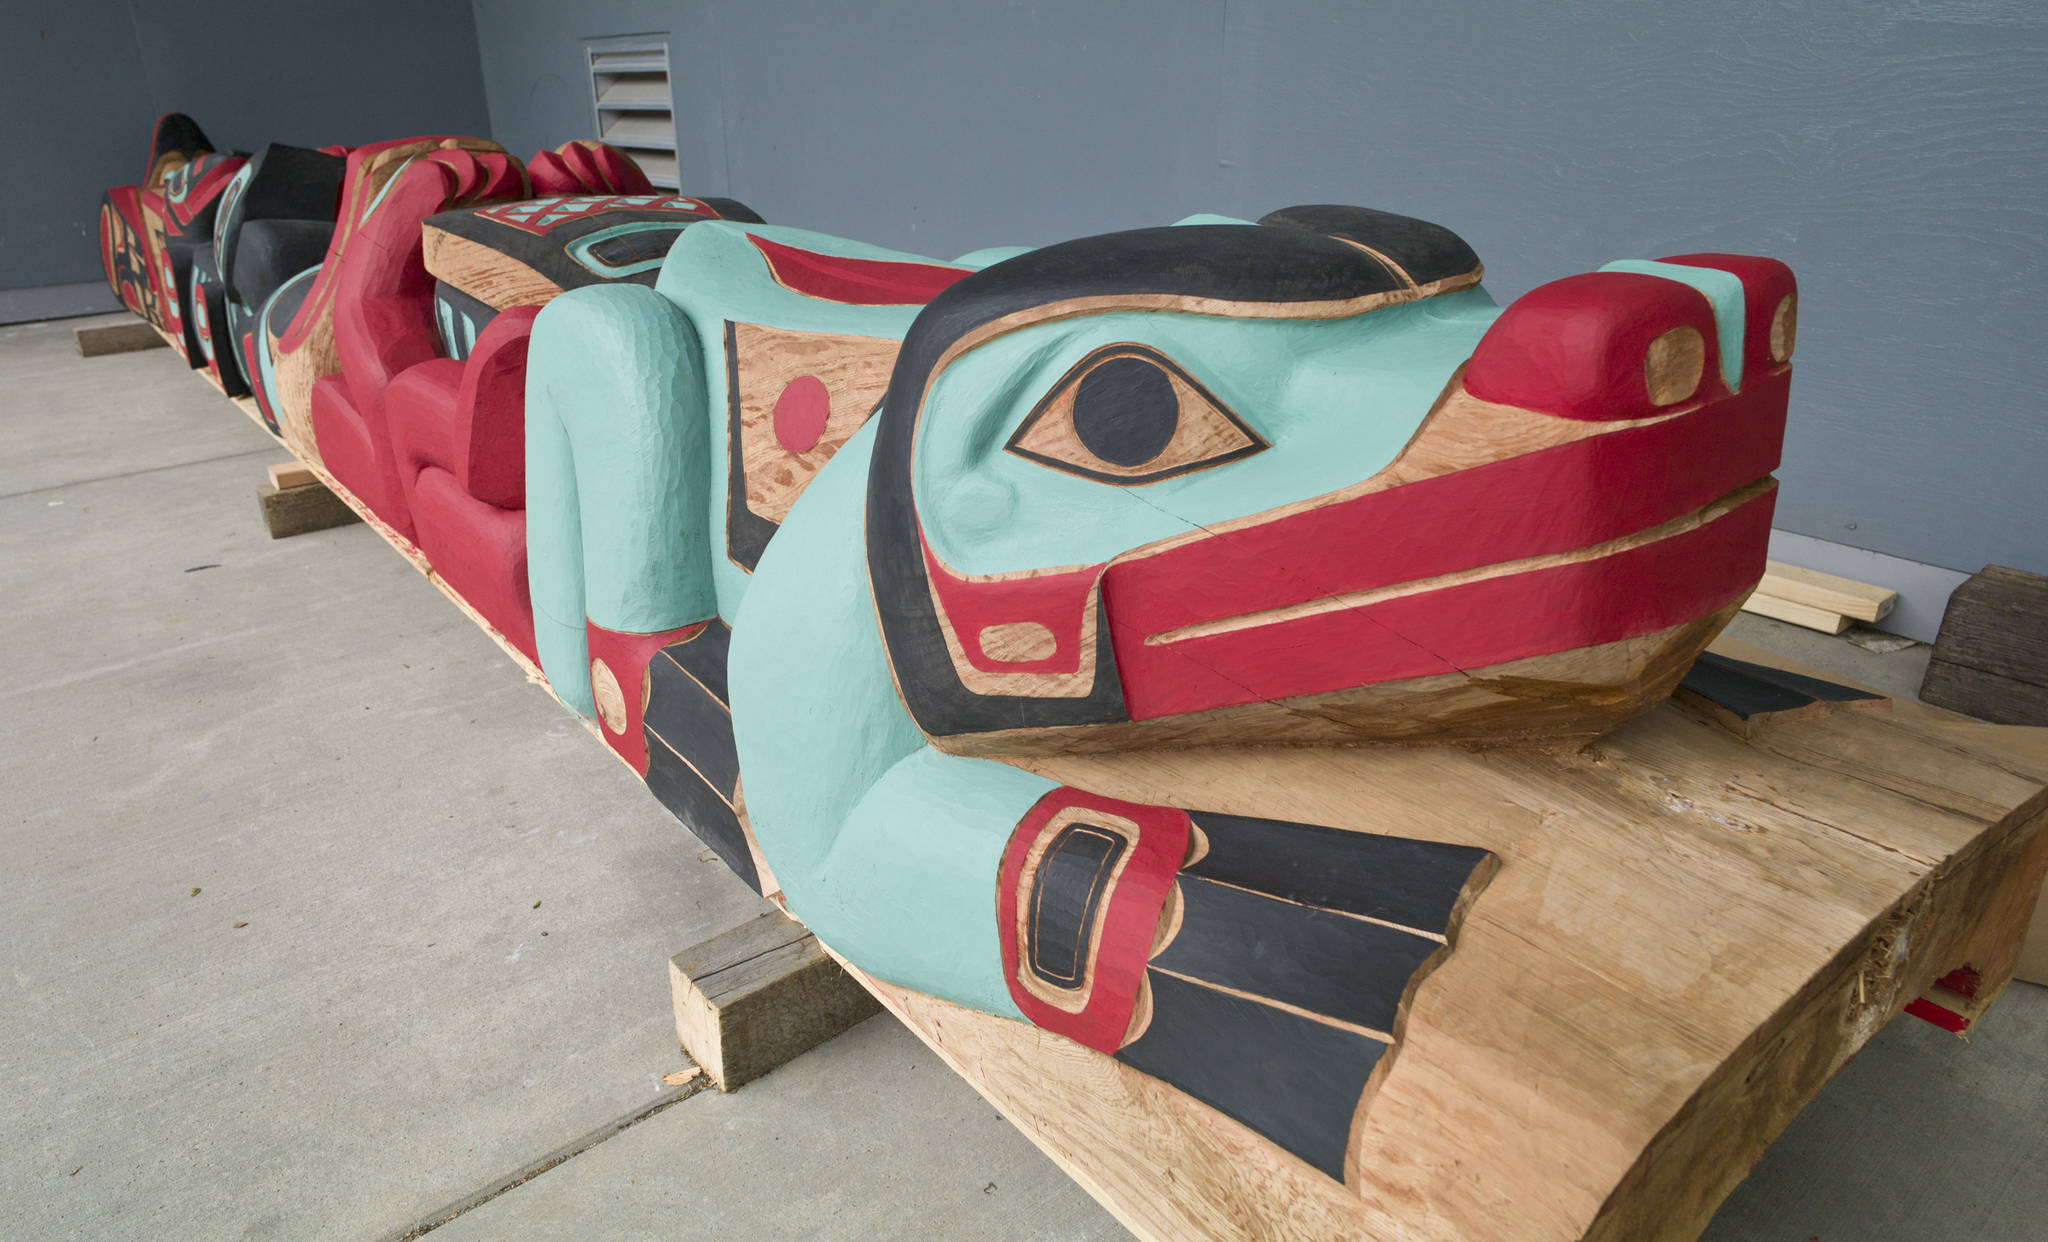 Reggie Peterson has carved two totem poles, this one is the raven pole, that will be presented at the Macaulay Salmon Hatchery on Saturday. (Michael Penn | Juneau Empire)